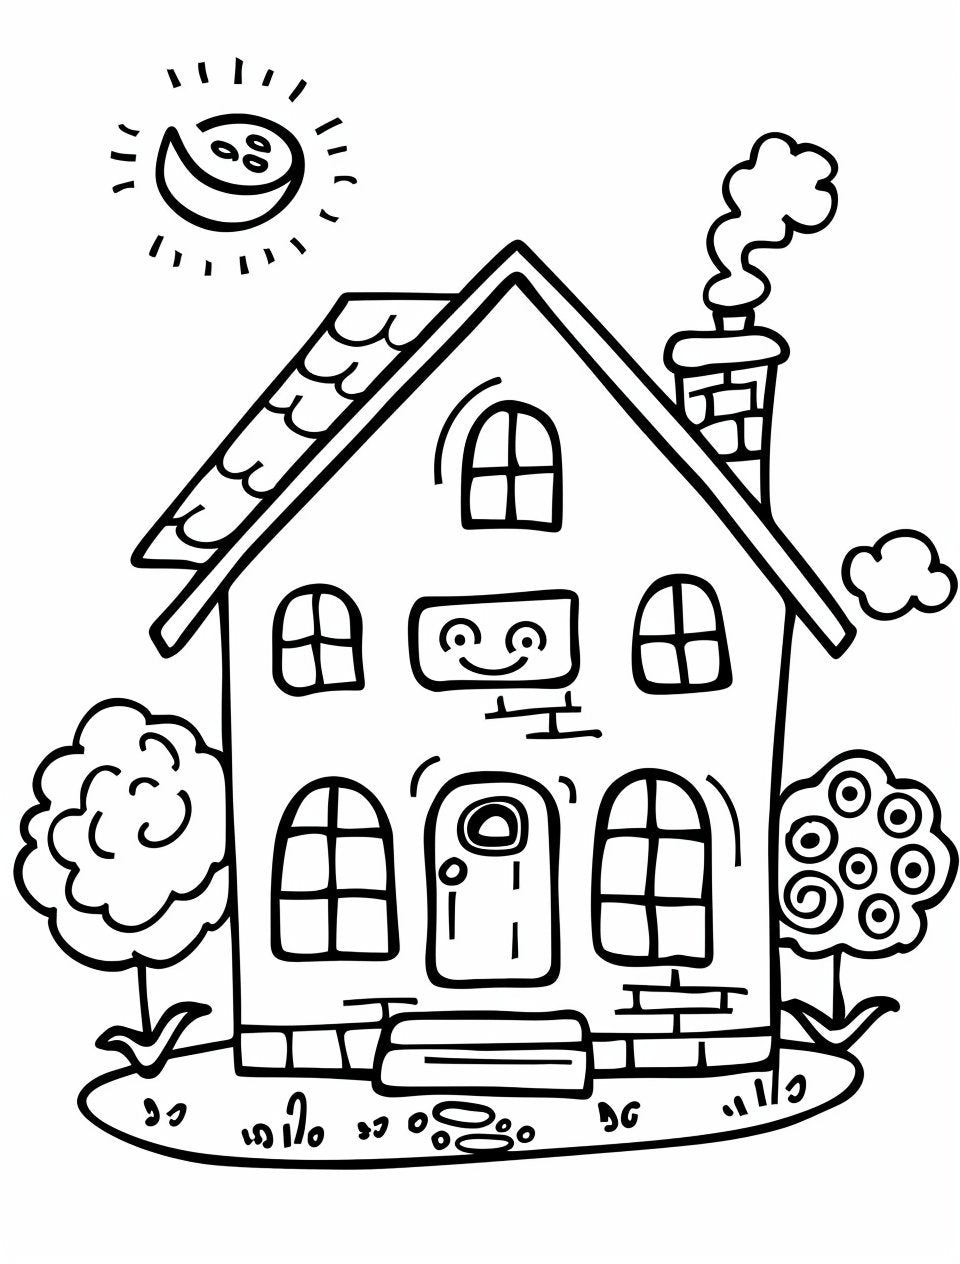 25 FREE House Coloring Sheets - My Coloring Zone